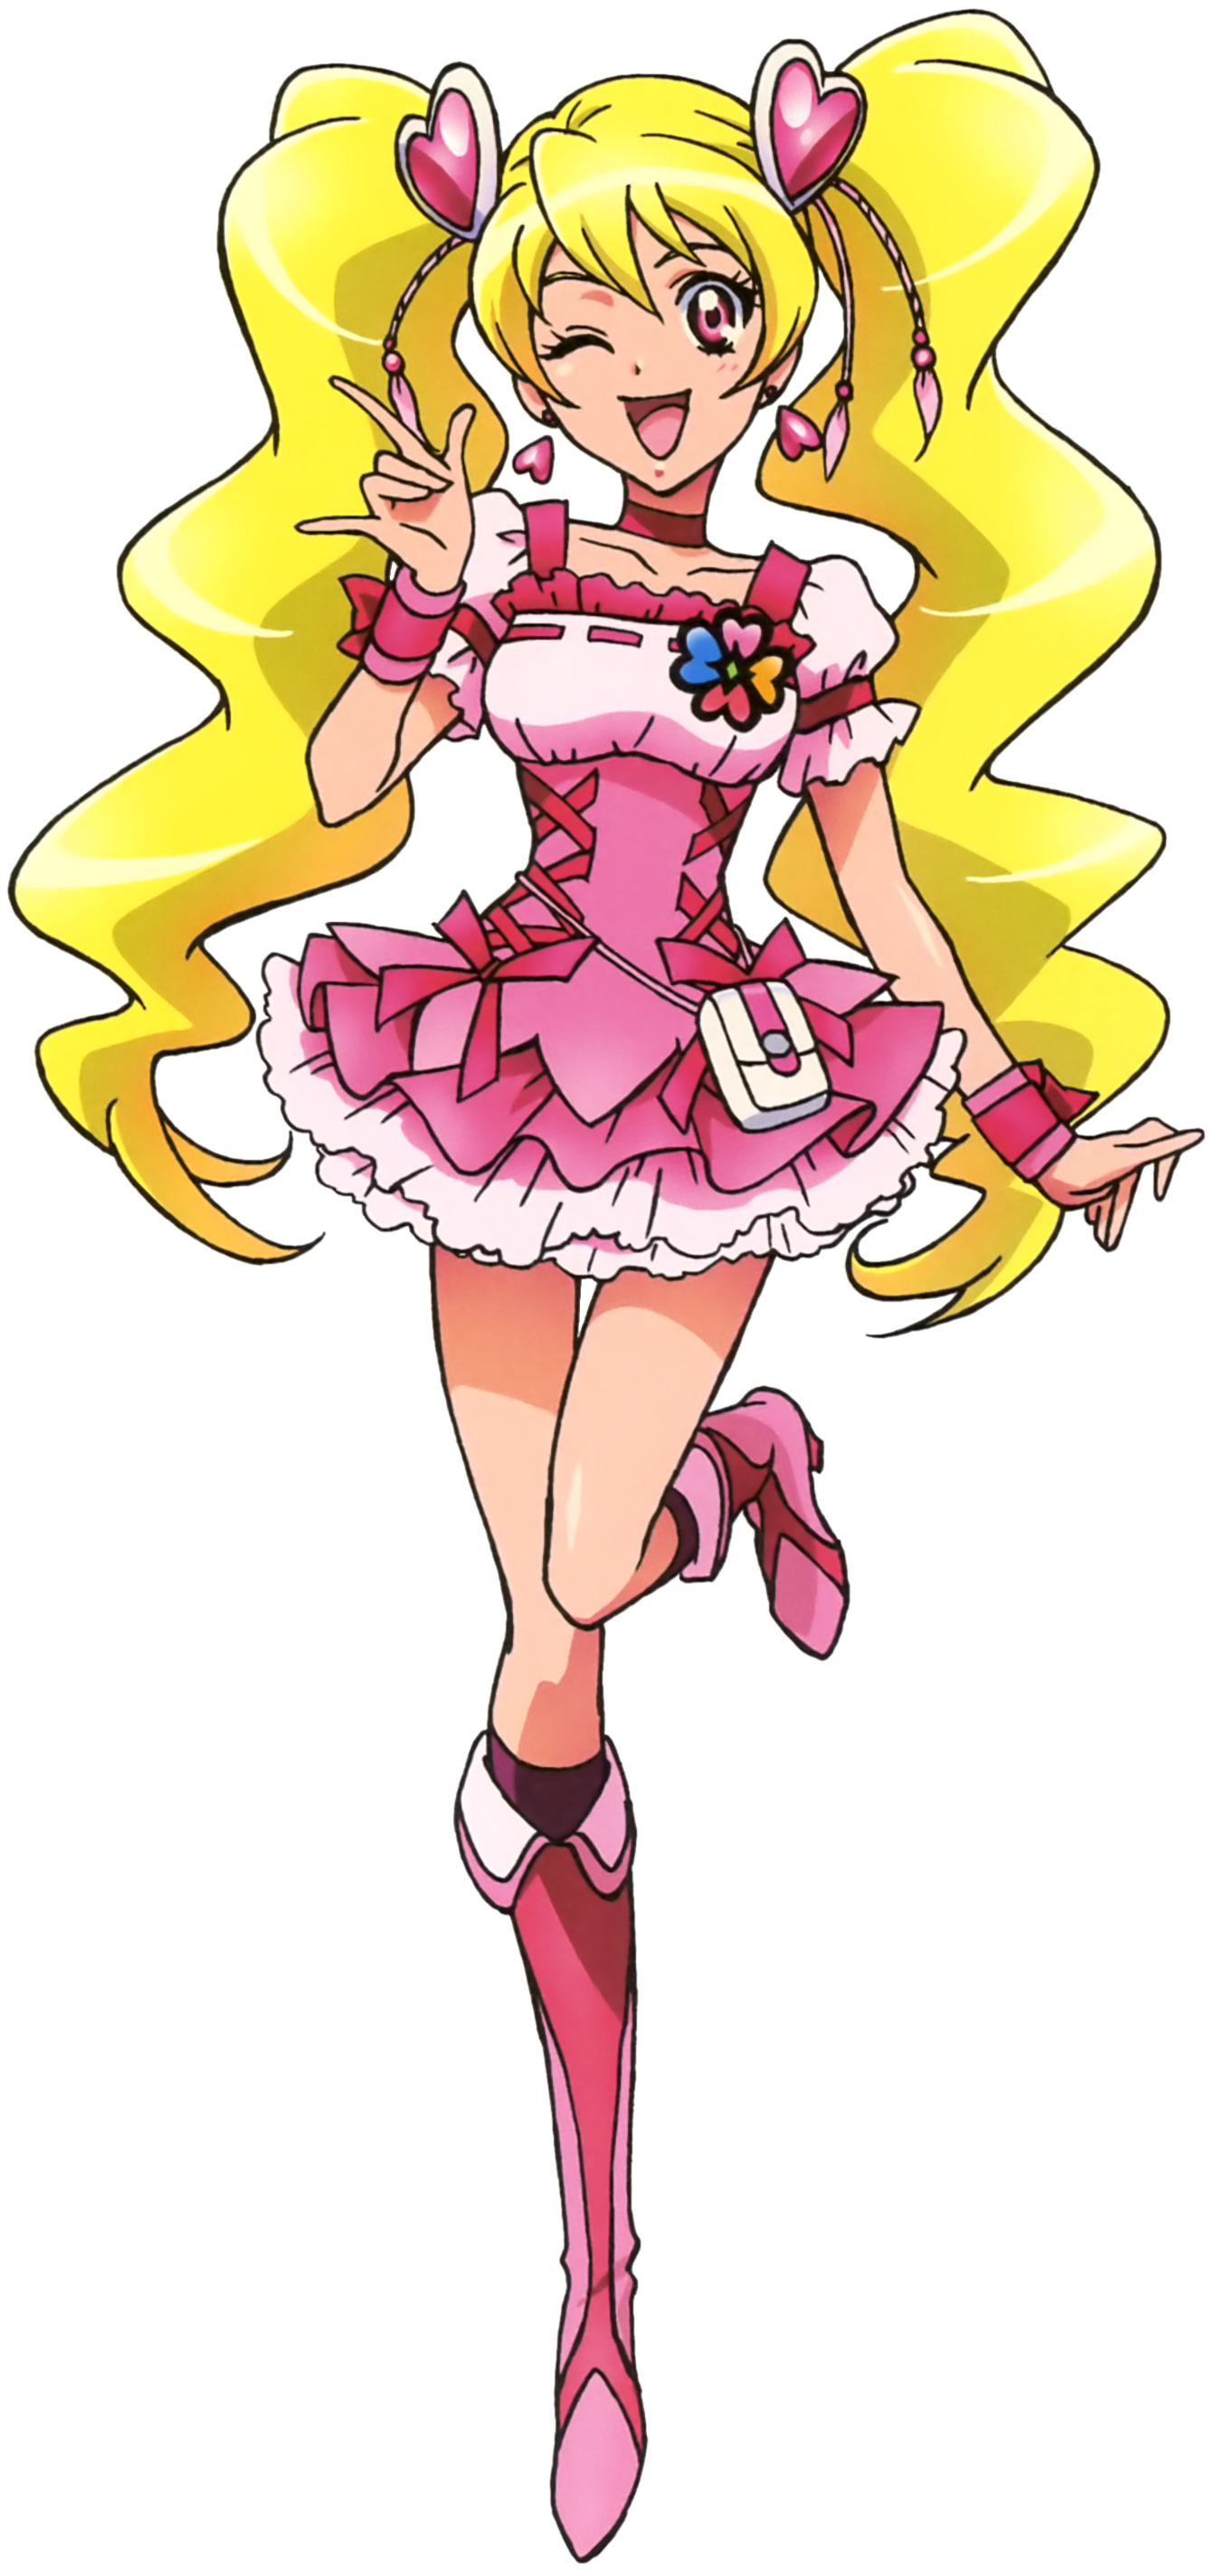 Image - Pretty Cure All Stars DX2 Cure Peach pose.png | Magical Girl ...